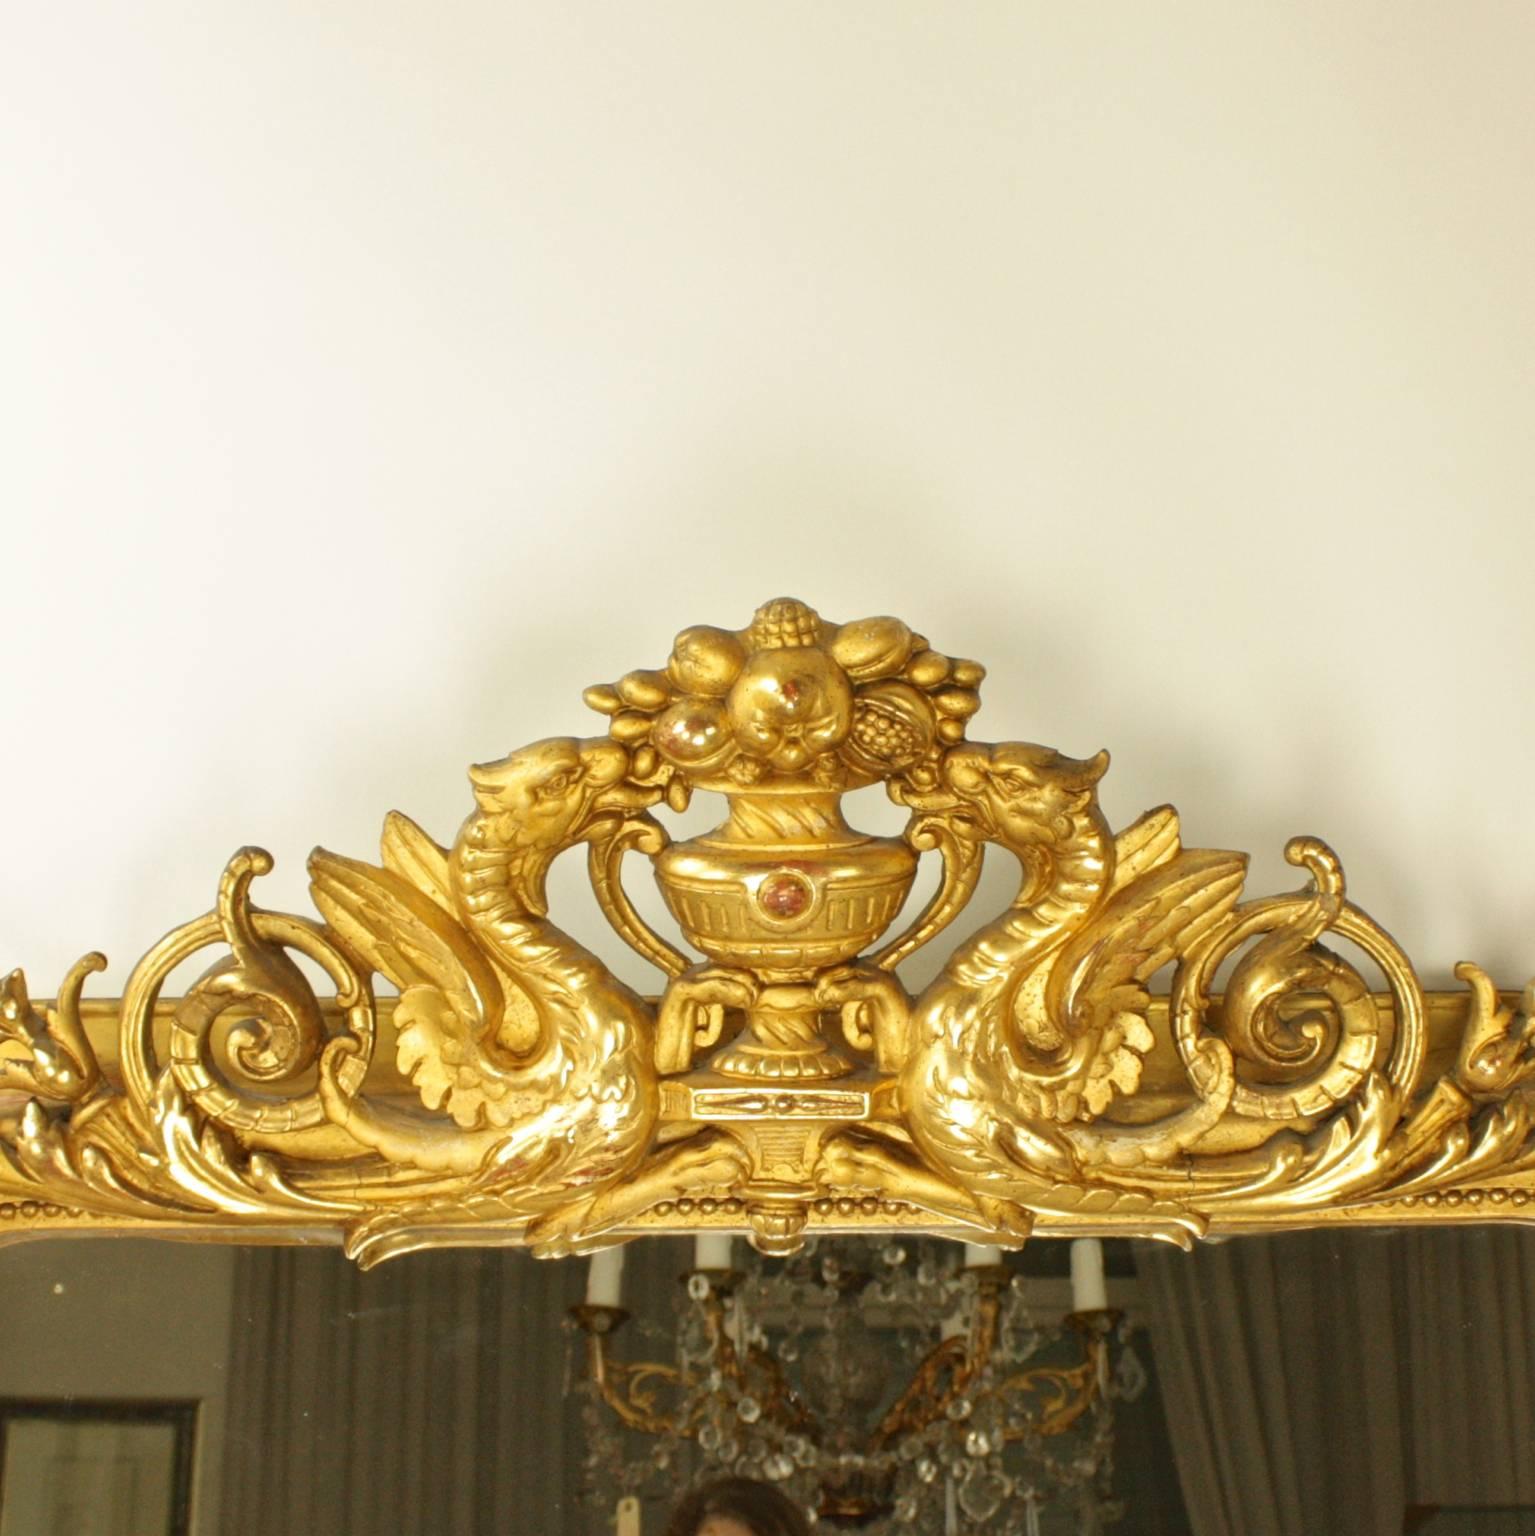 A large  19th century French giltwood mirror, the large rectangular plate surmounted by a pierced cresting carved with a central vase of flowers and flanked by two winged gryphons: mythical creatures with the head, wings and claws of an eagle, and